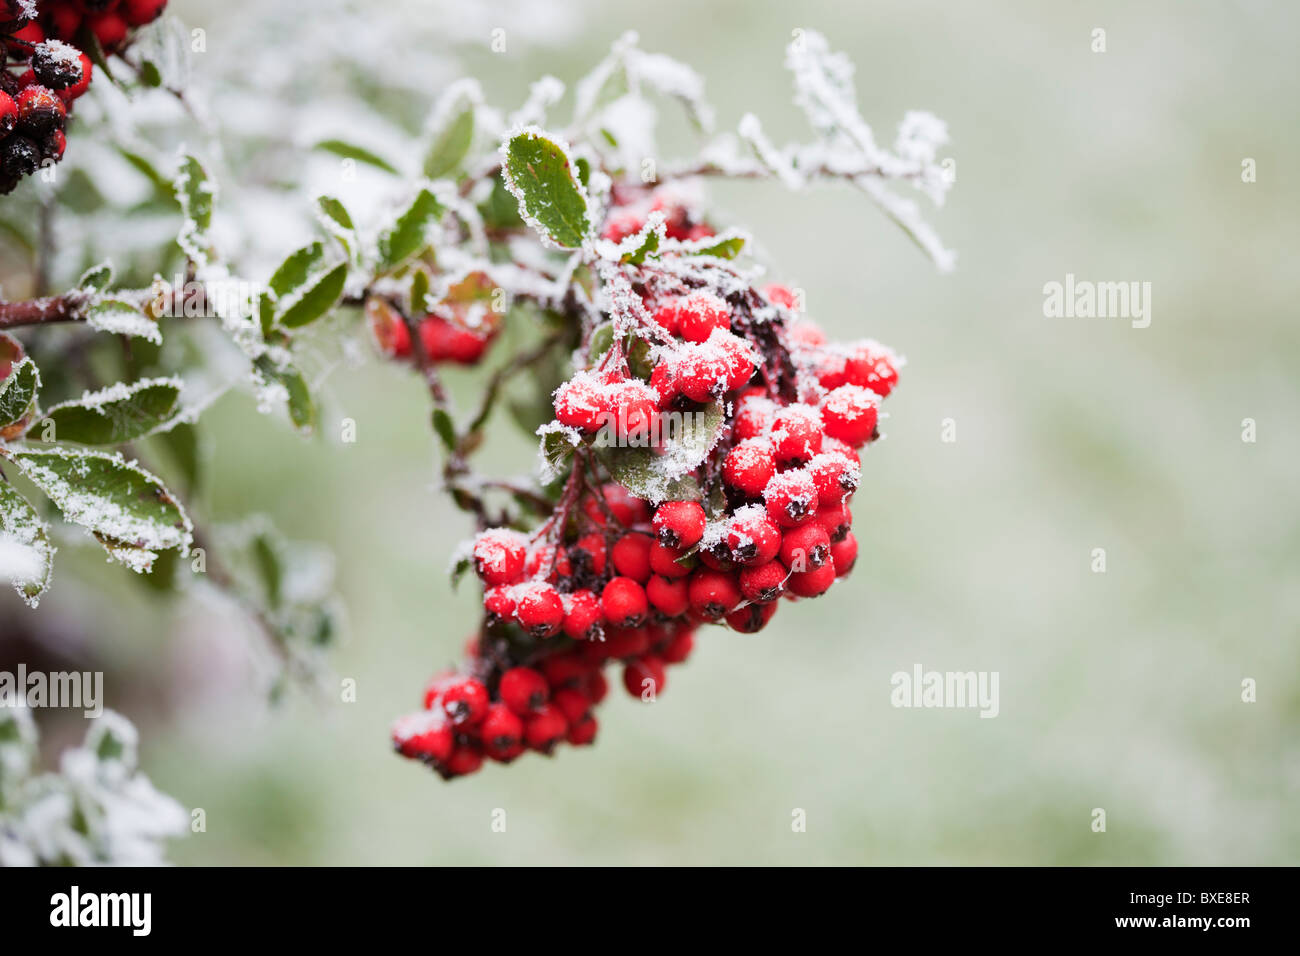 Pyracantha berries with hoar frost. Stock Photo